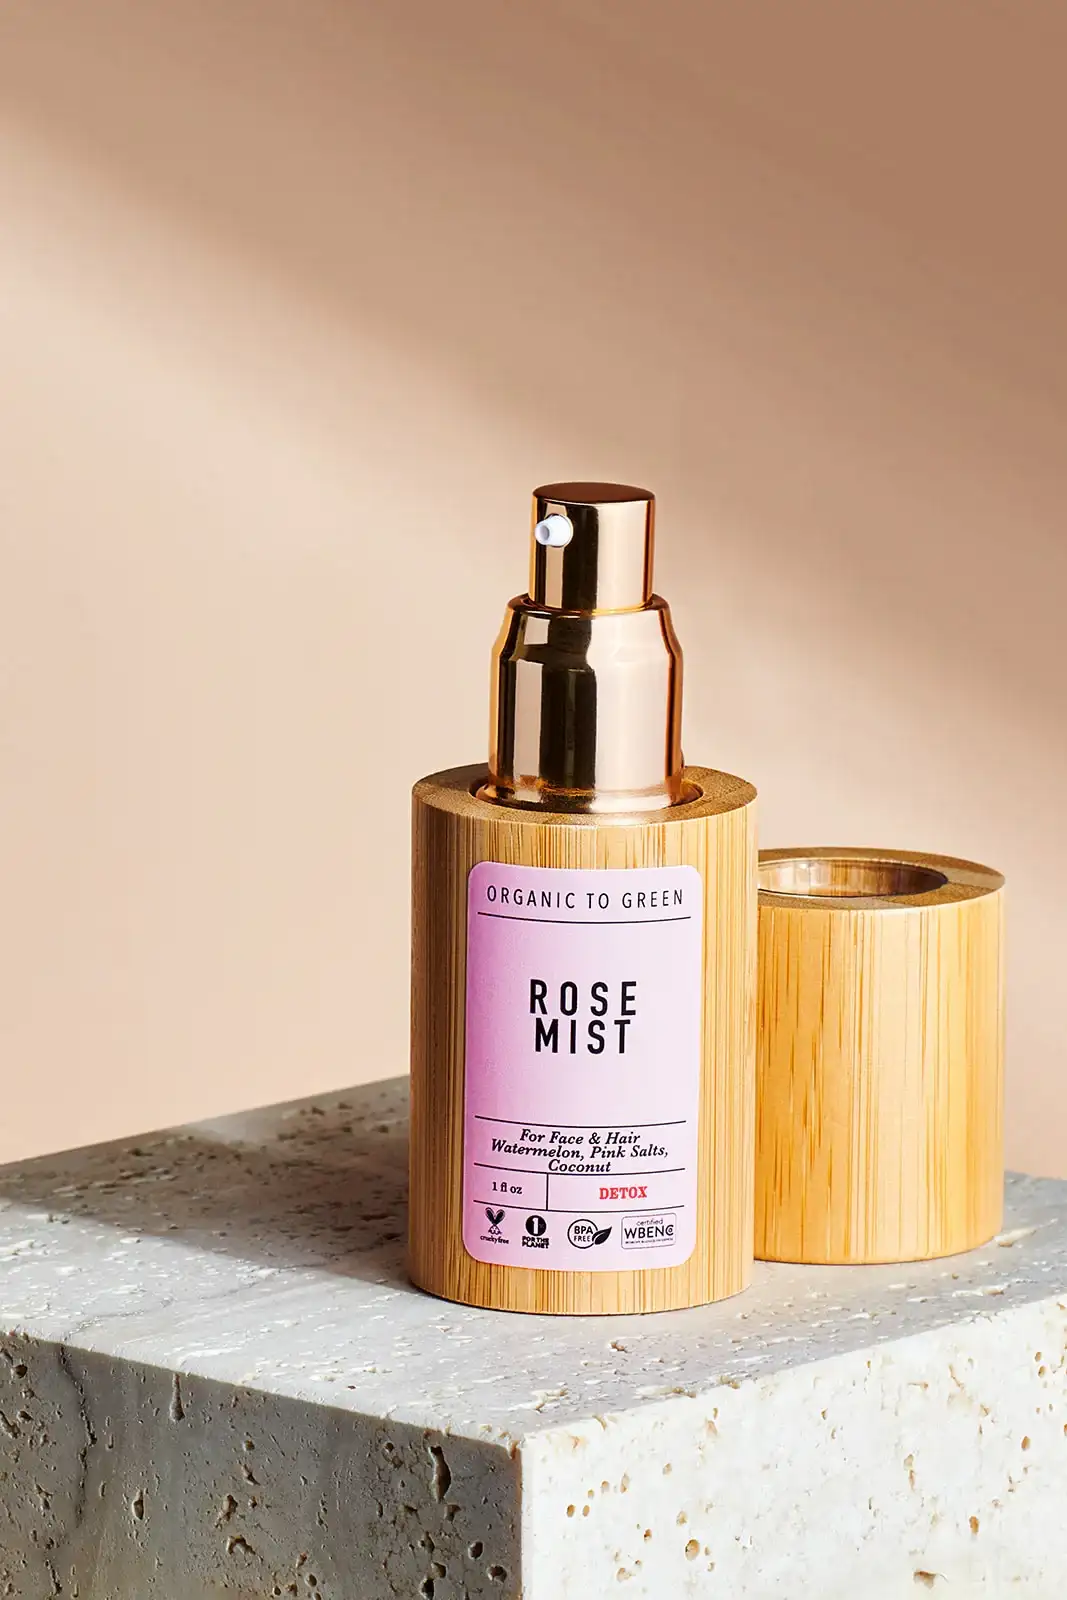 Image of Rose Mist Spray Face & Hair - Watermelon, Pink Salts, Coconut